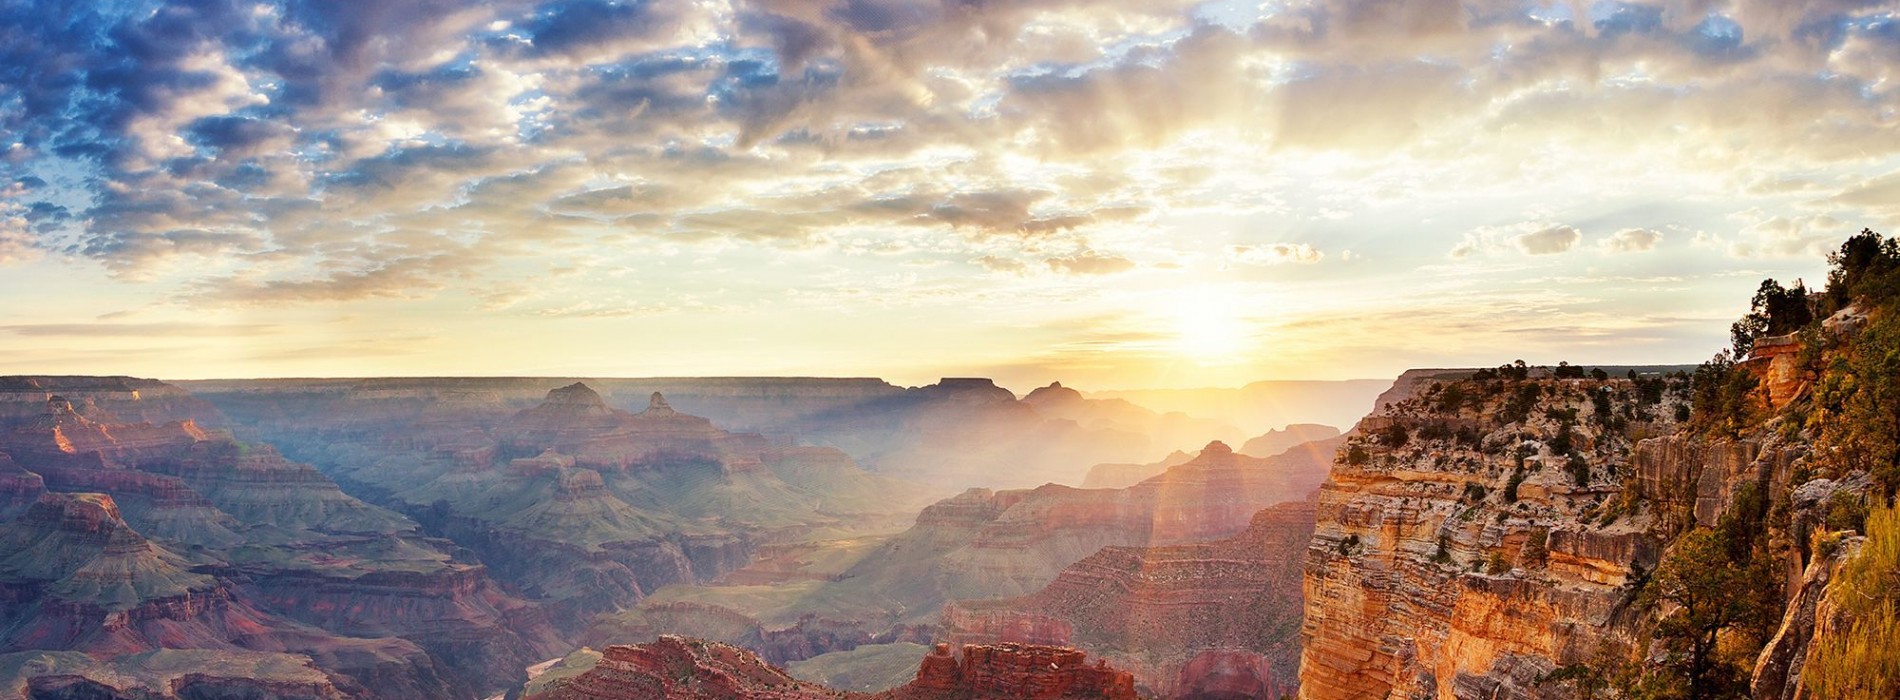 View_of_Grand_Canyon_at_sunrise.jpg